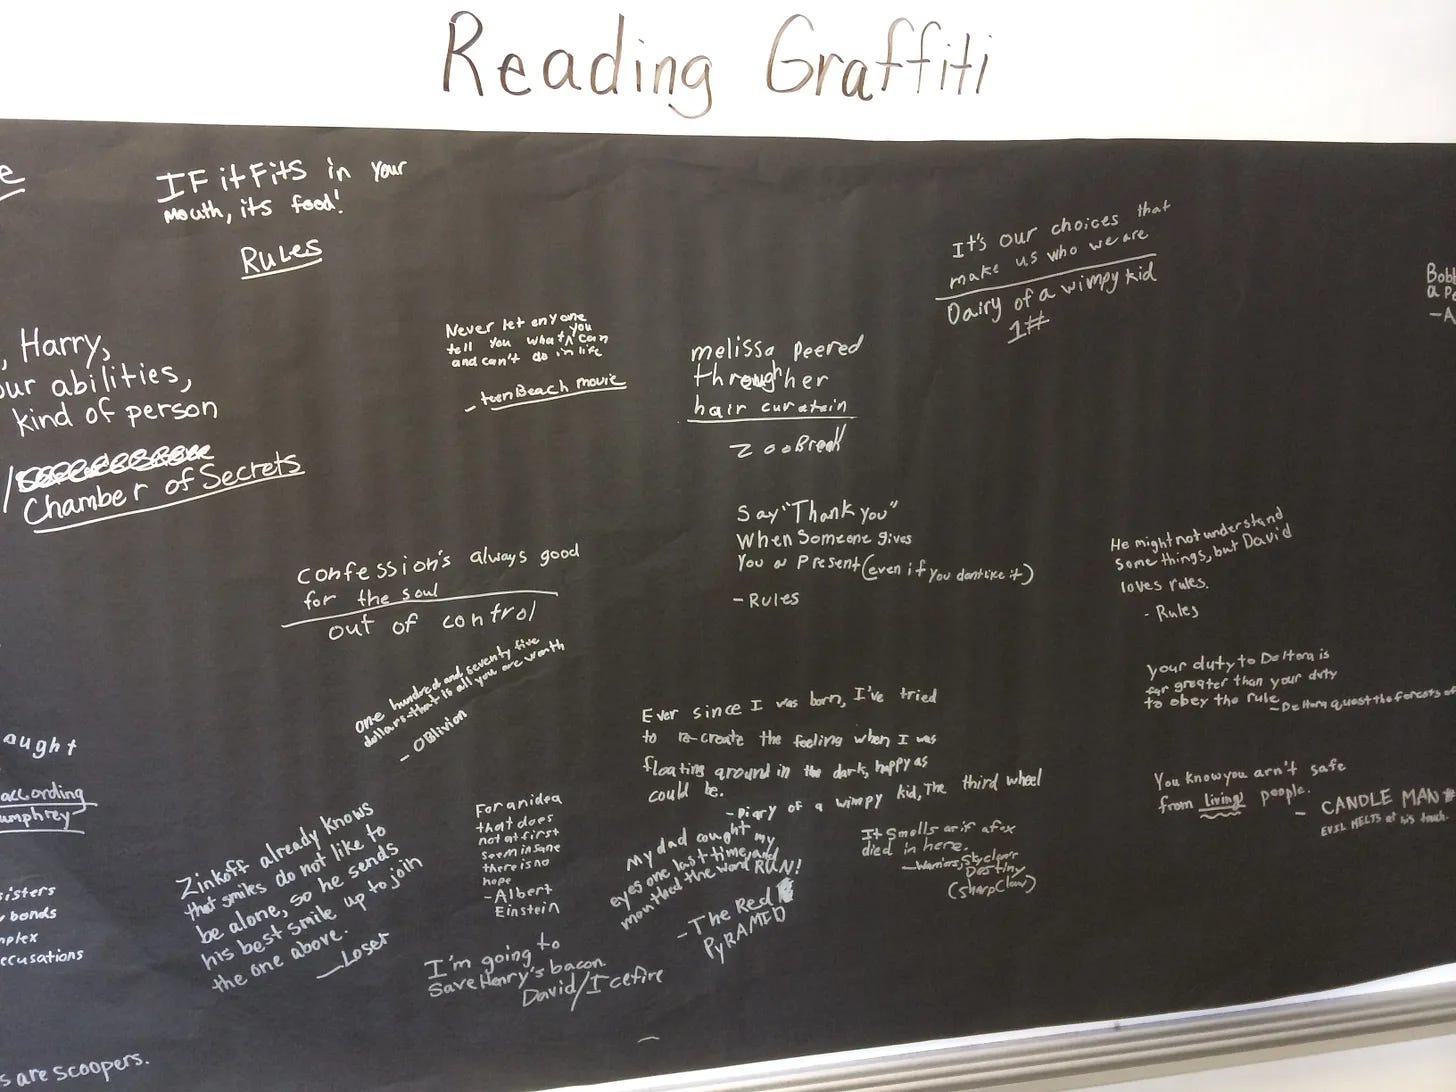 Image: A reading graffiti board with black butcher paper and metallic silver markers